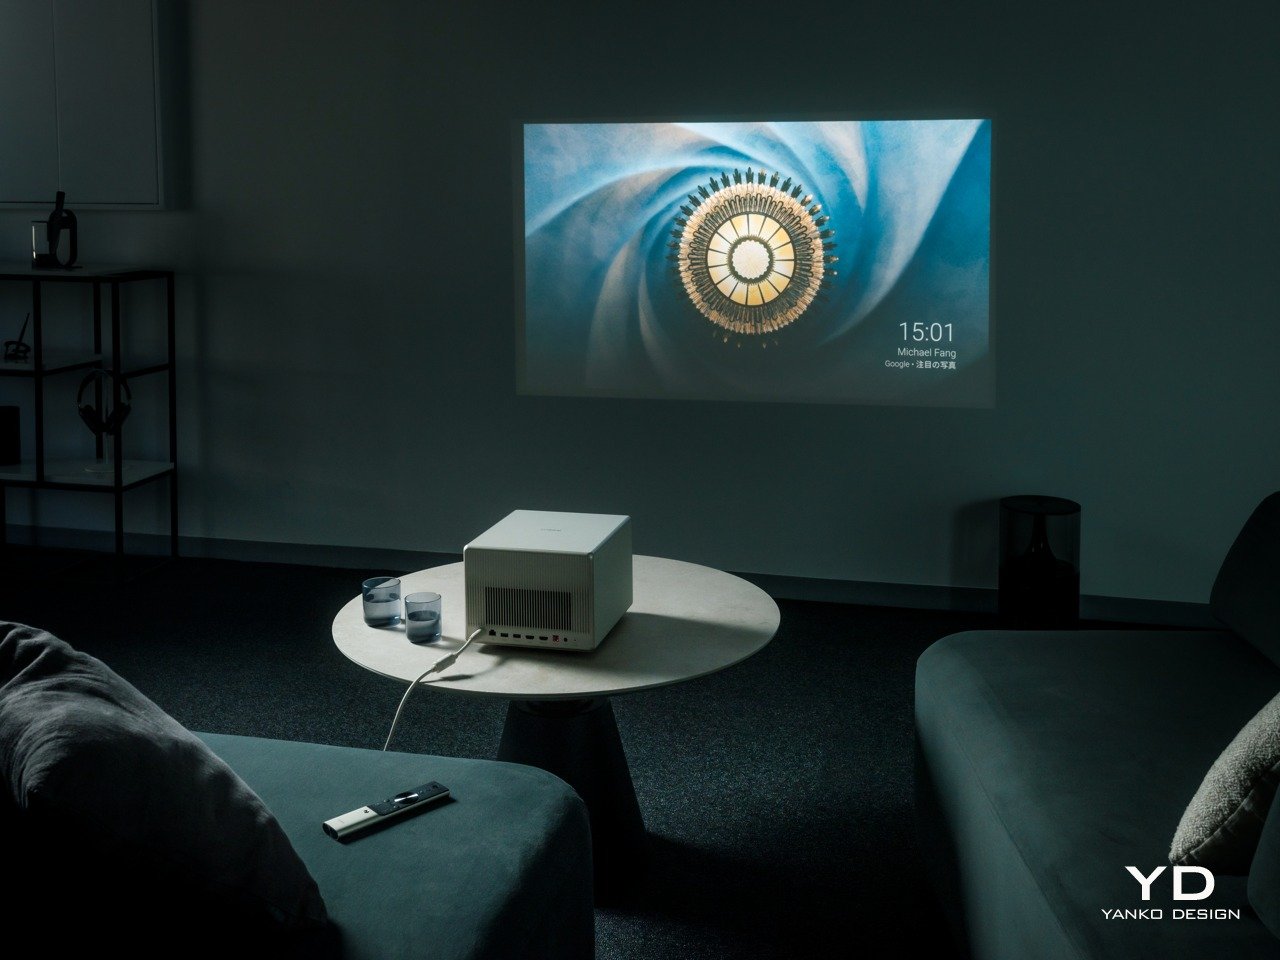 XGIMI Horizon Ultra 4K Lifestyle Projector Announced Insider Information